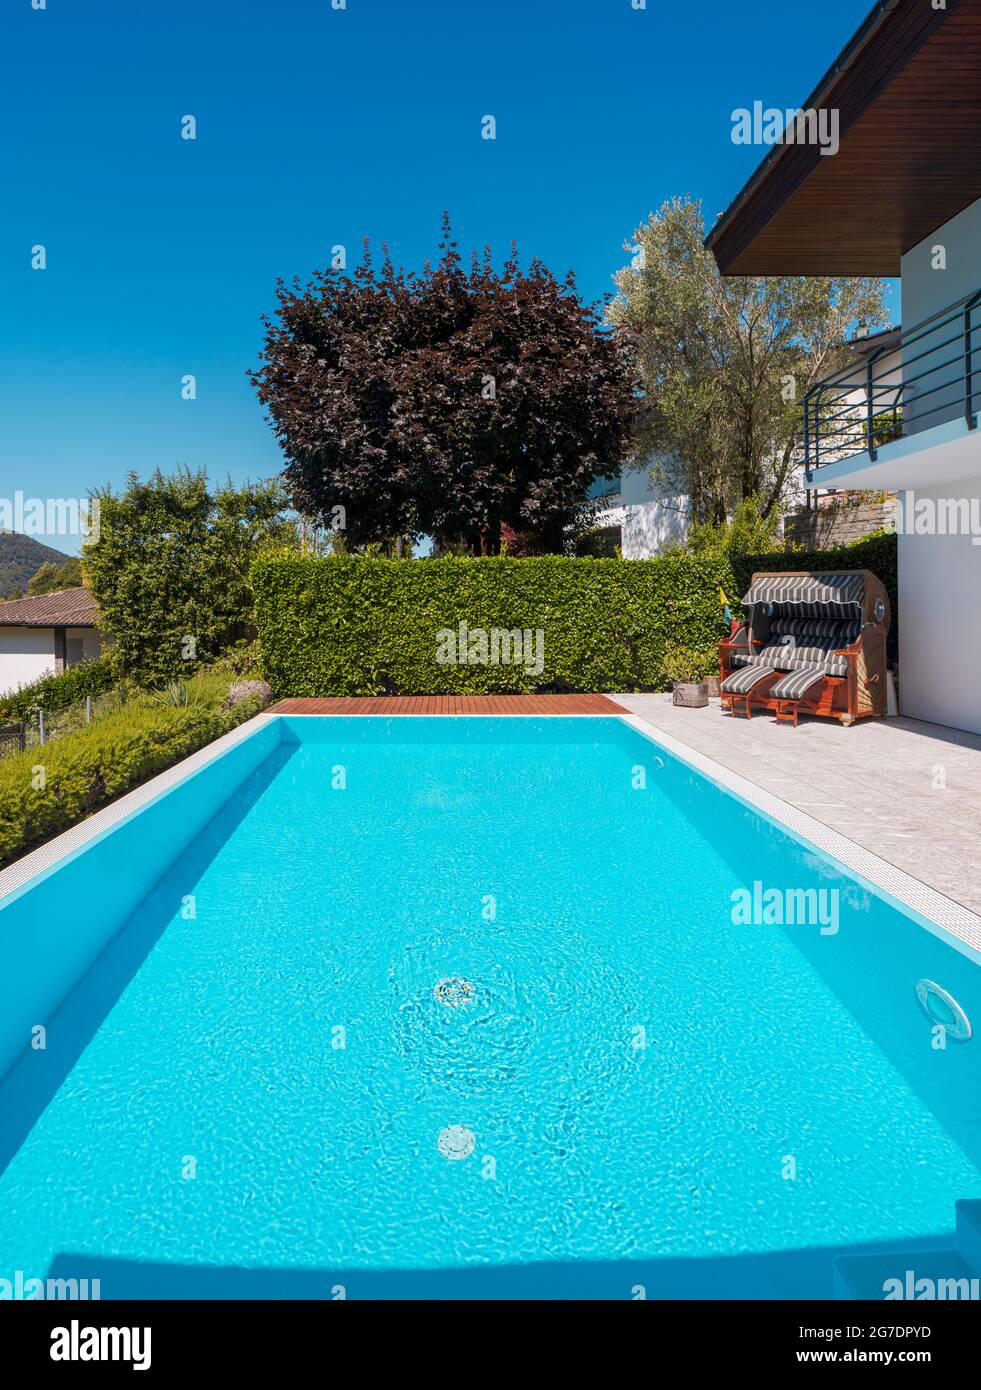 Front view pool with clear water and large green hedge, perfect for a vacation. Sunny day with blue skies and nobody inside. Stock Photo